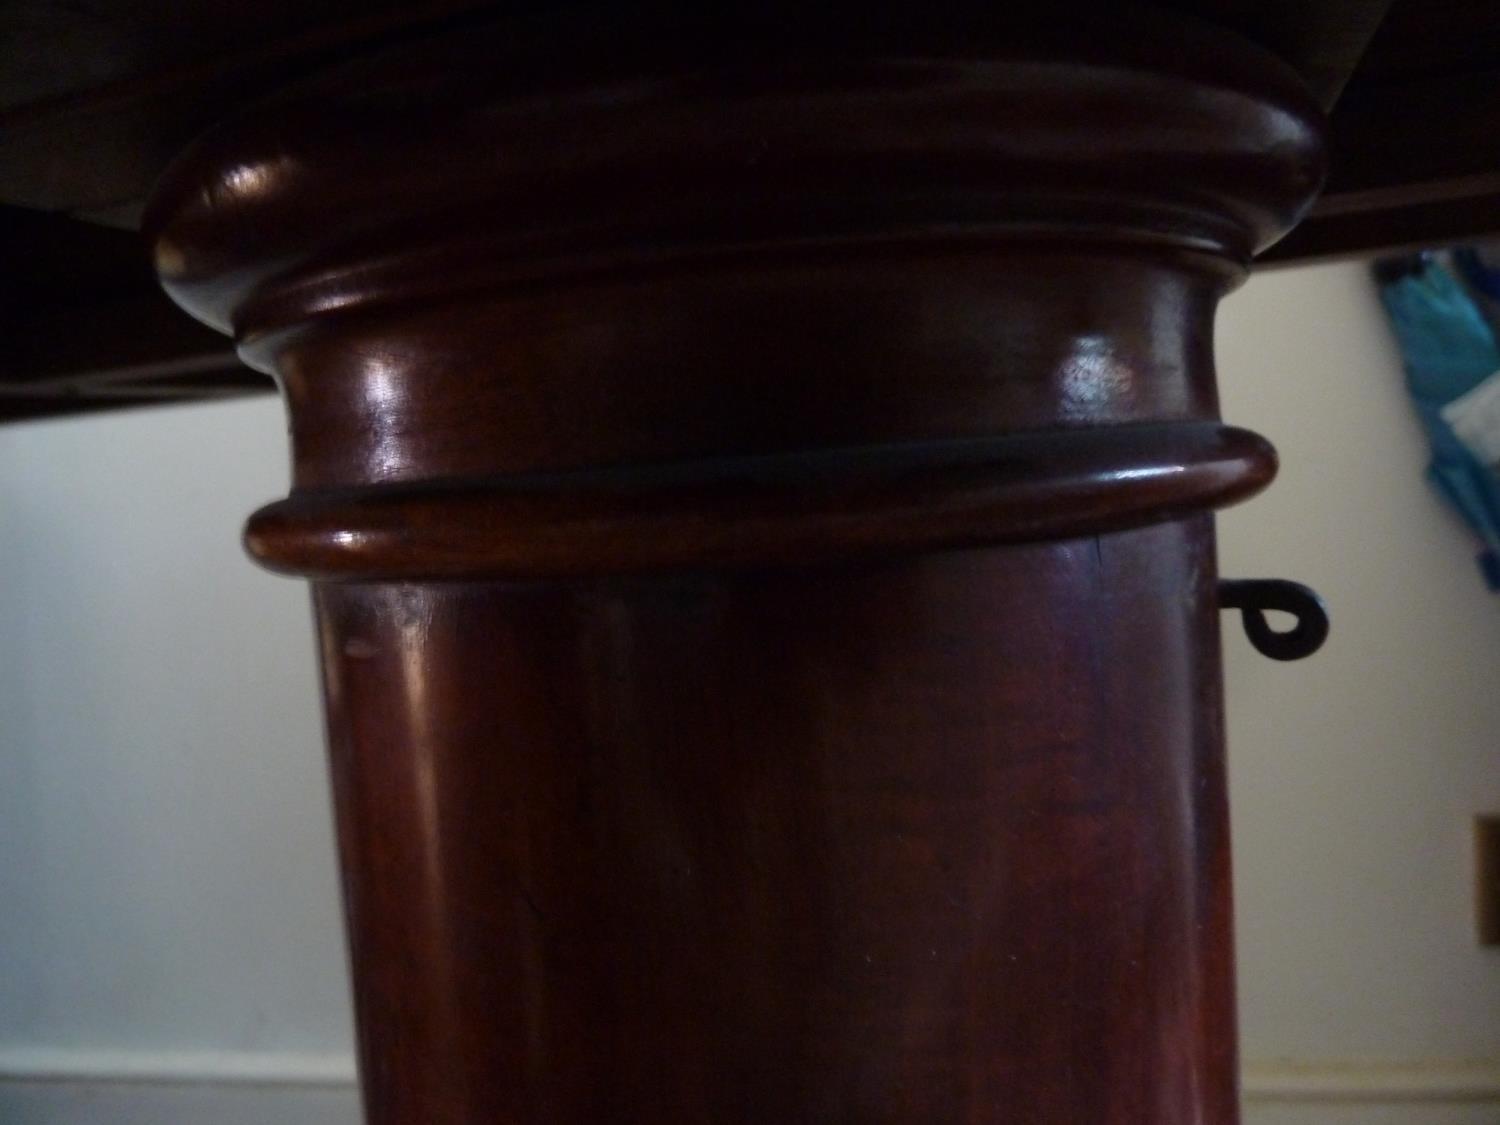 A Regency mahogany invalid or bedroom table with sliding mechanism to position over a bed, w 91 cm x - Image 5 of 9